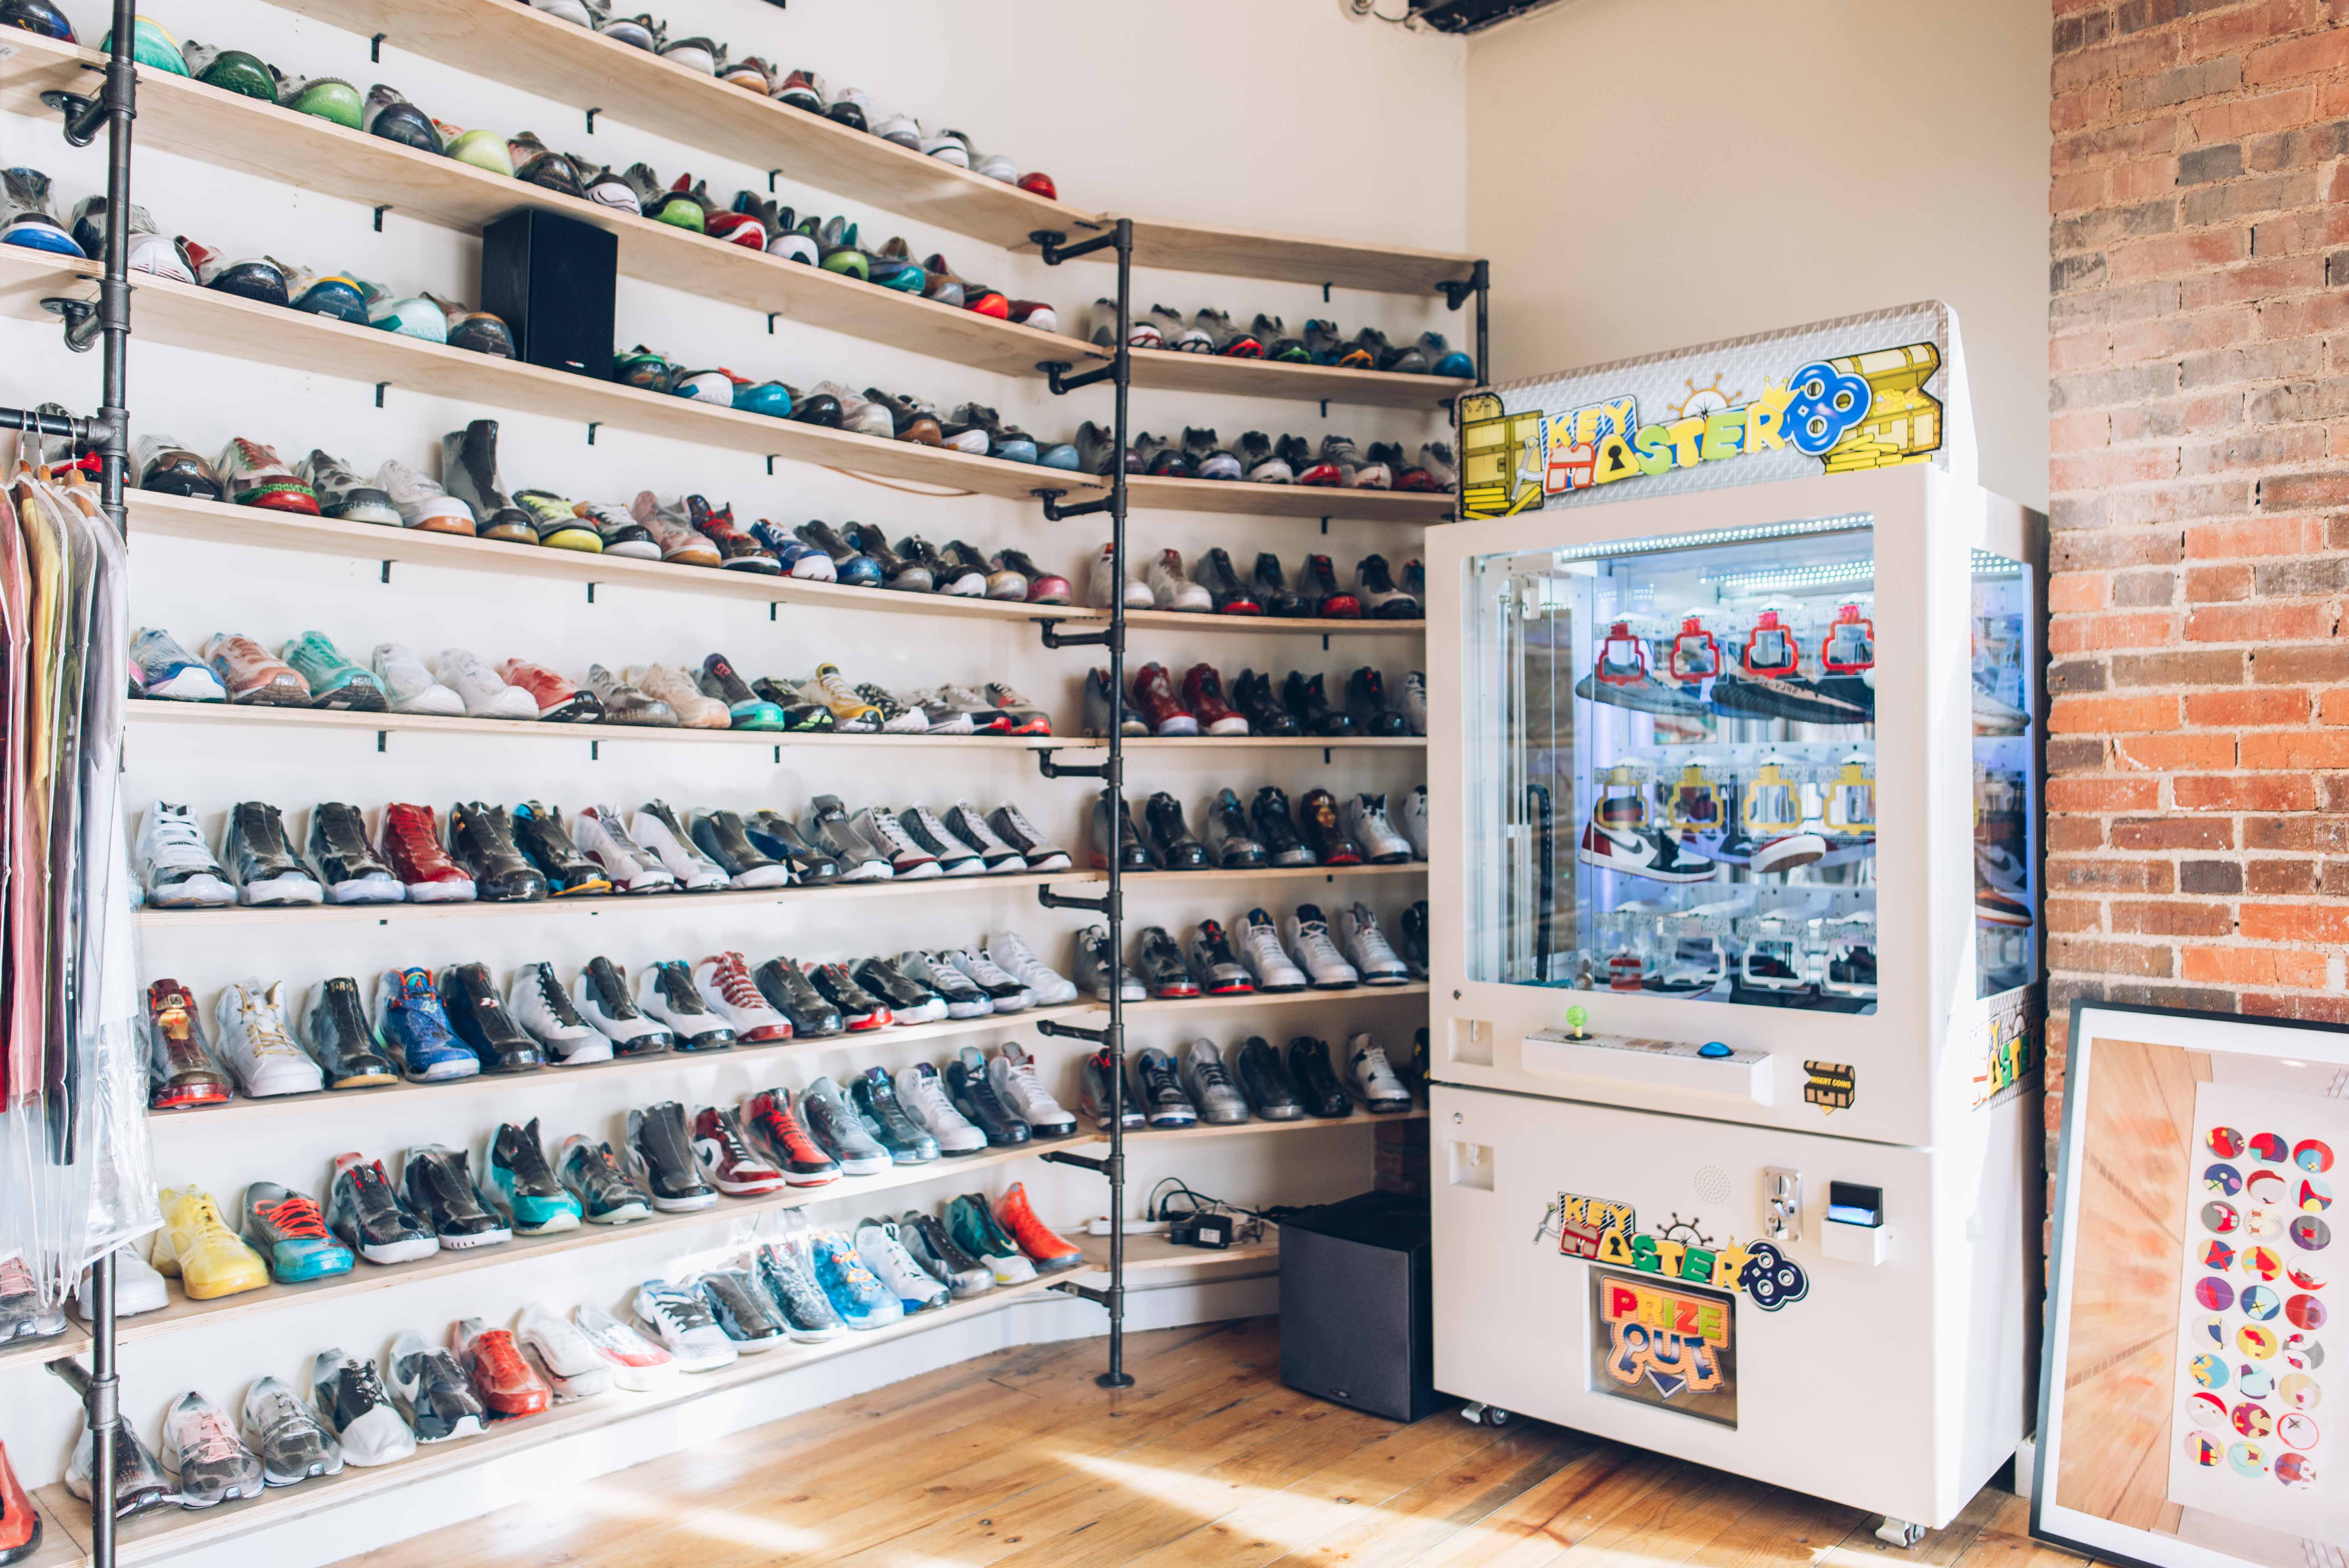 Special offer > exclusive shoe stores near me, Up to 75% OFF